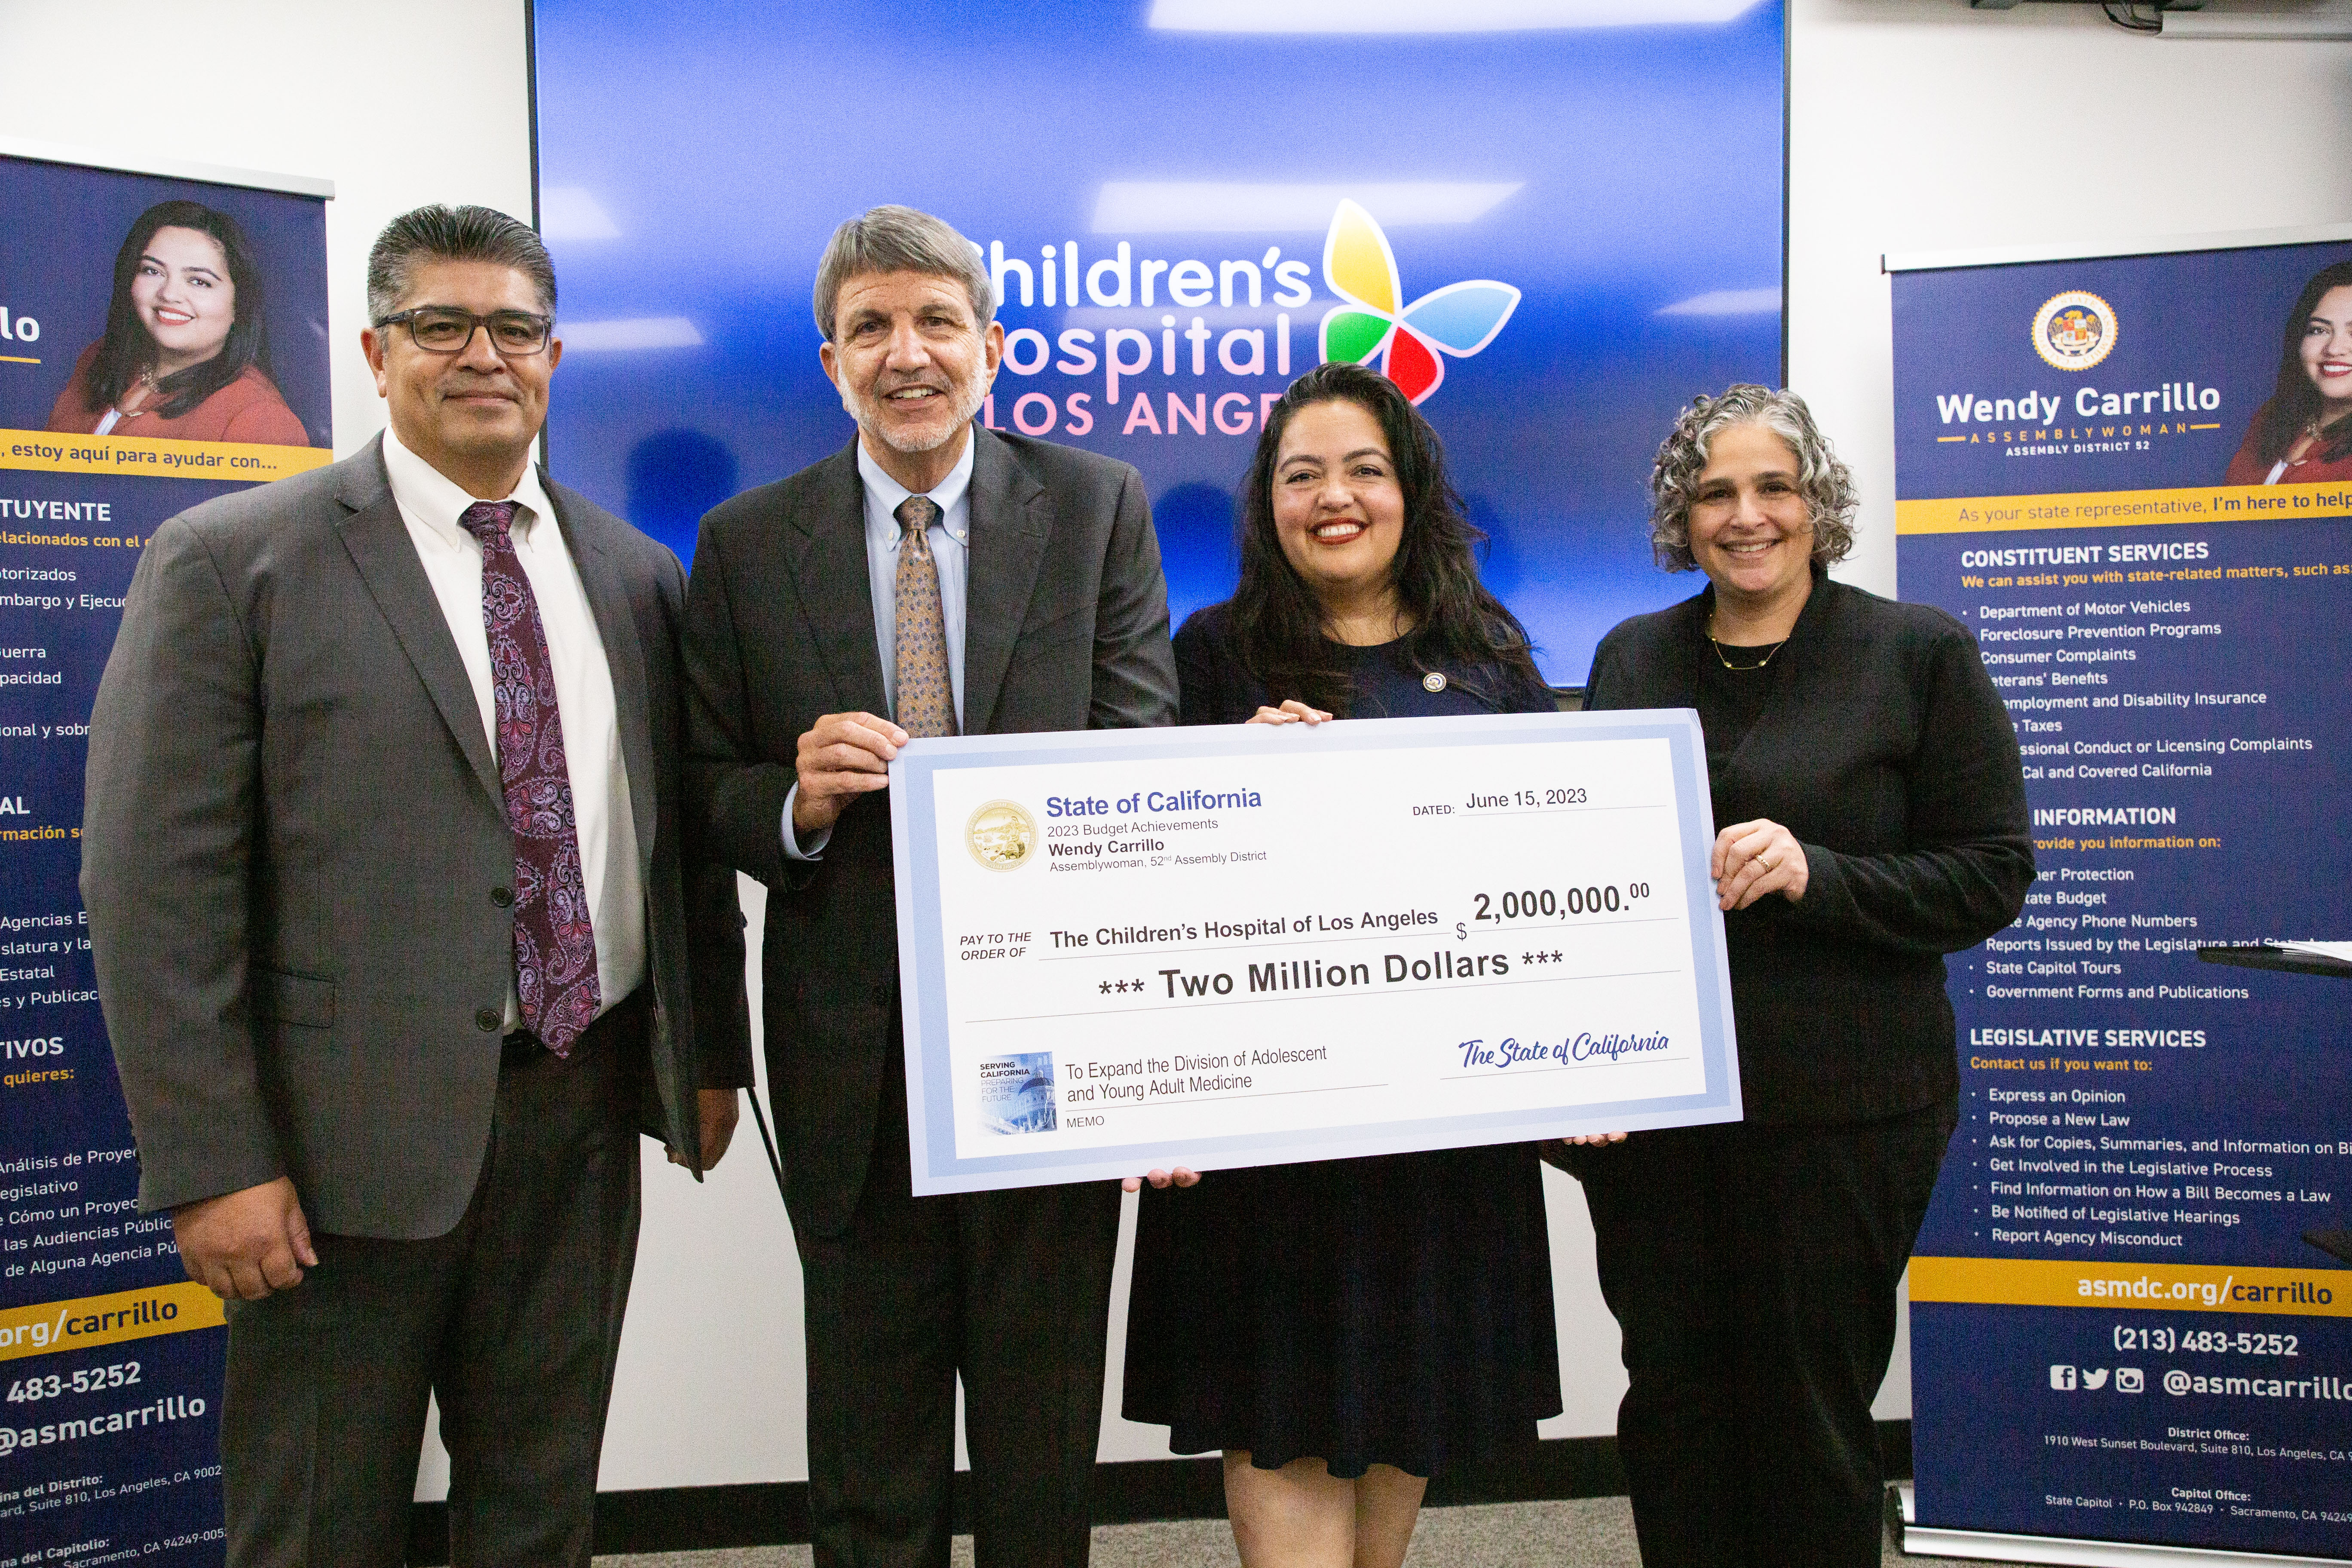 Assemblywoman Wendy Carrillo Presents $2 Million in State Funding to Children’s Hospital Los Angeles for Pediatric Research and Clinical Expansion 